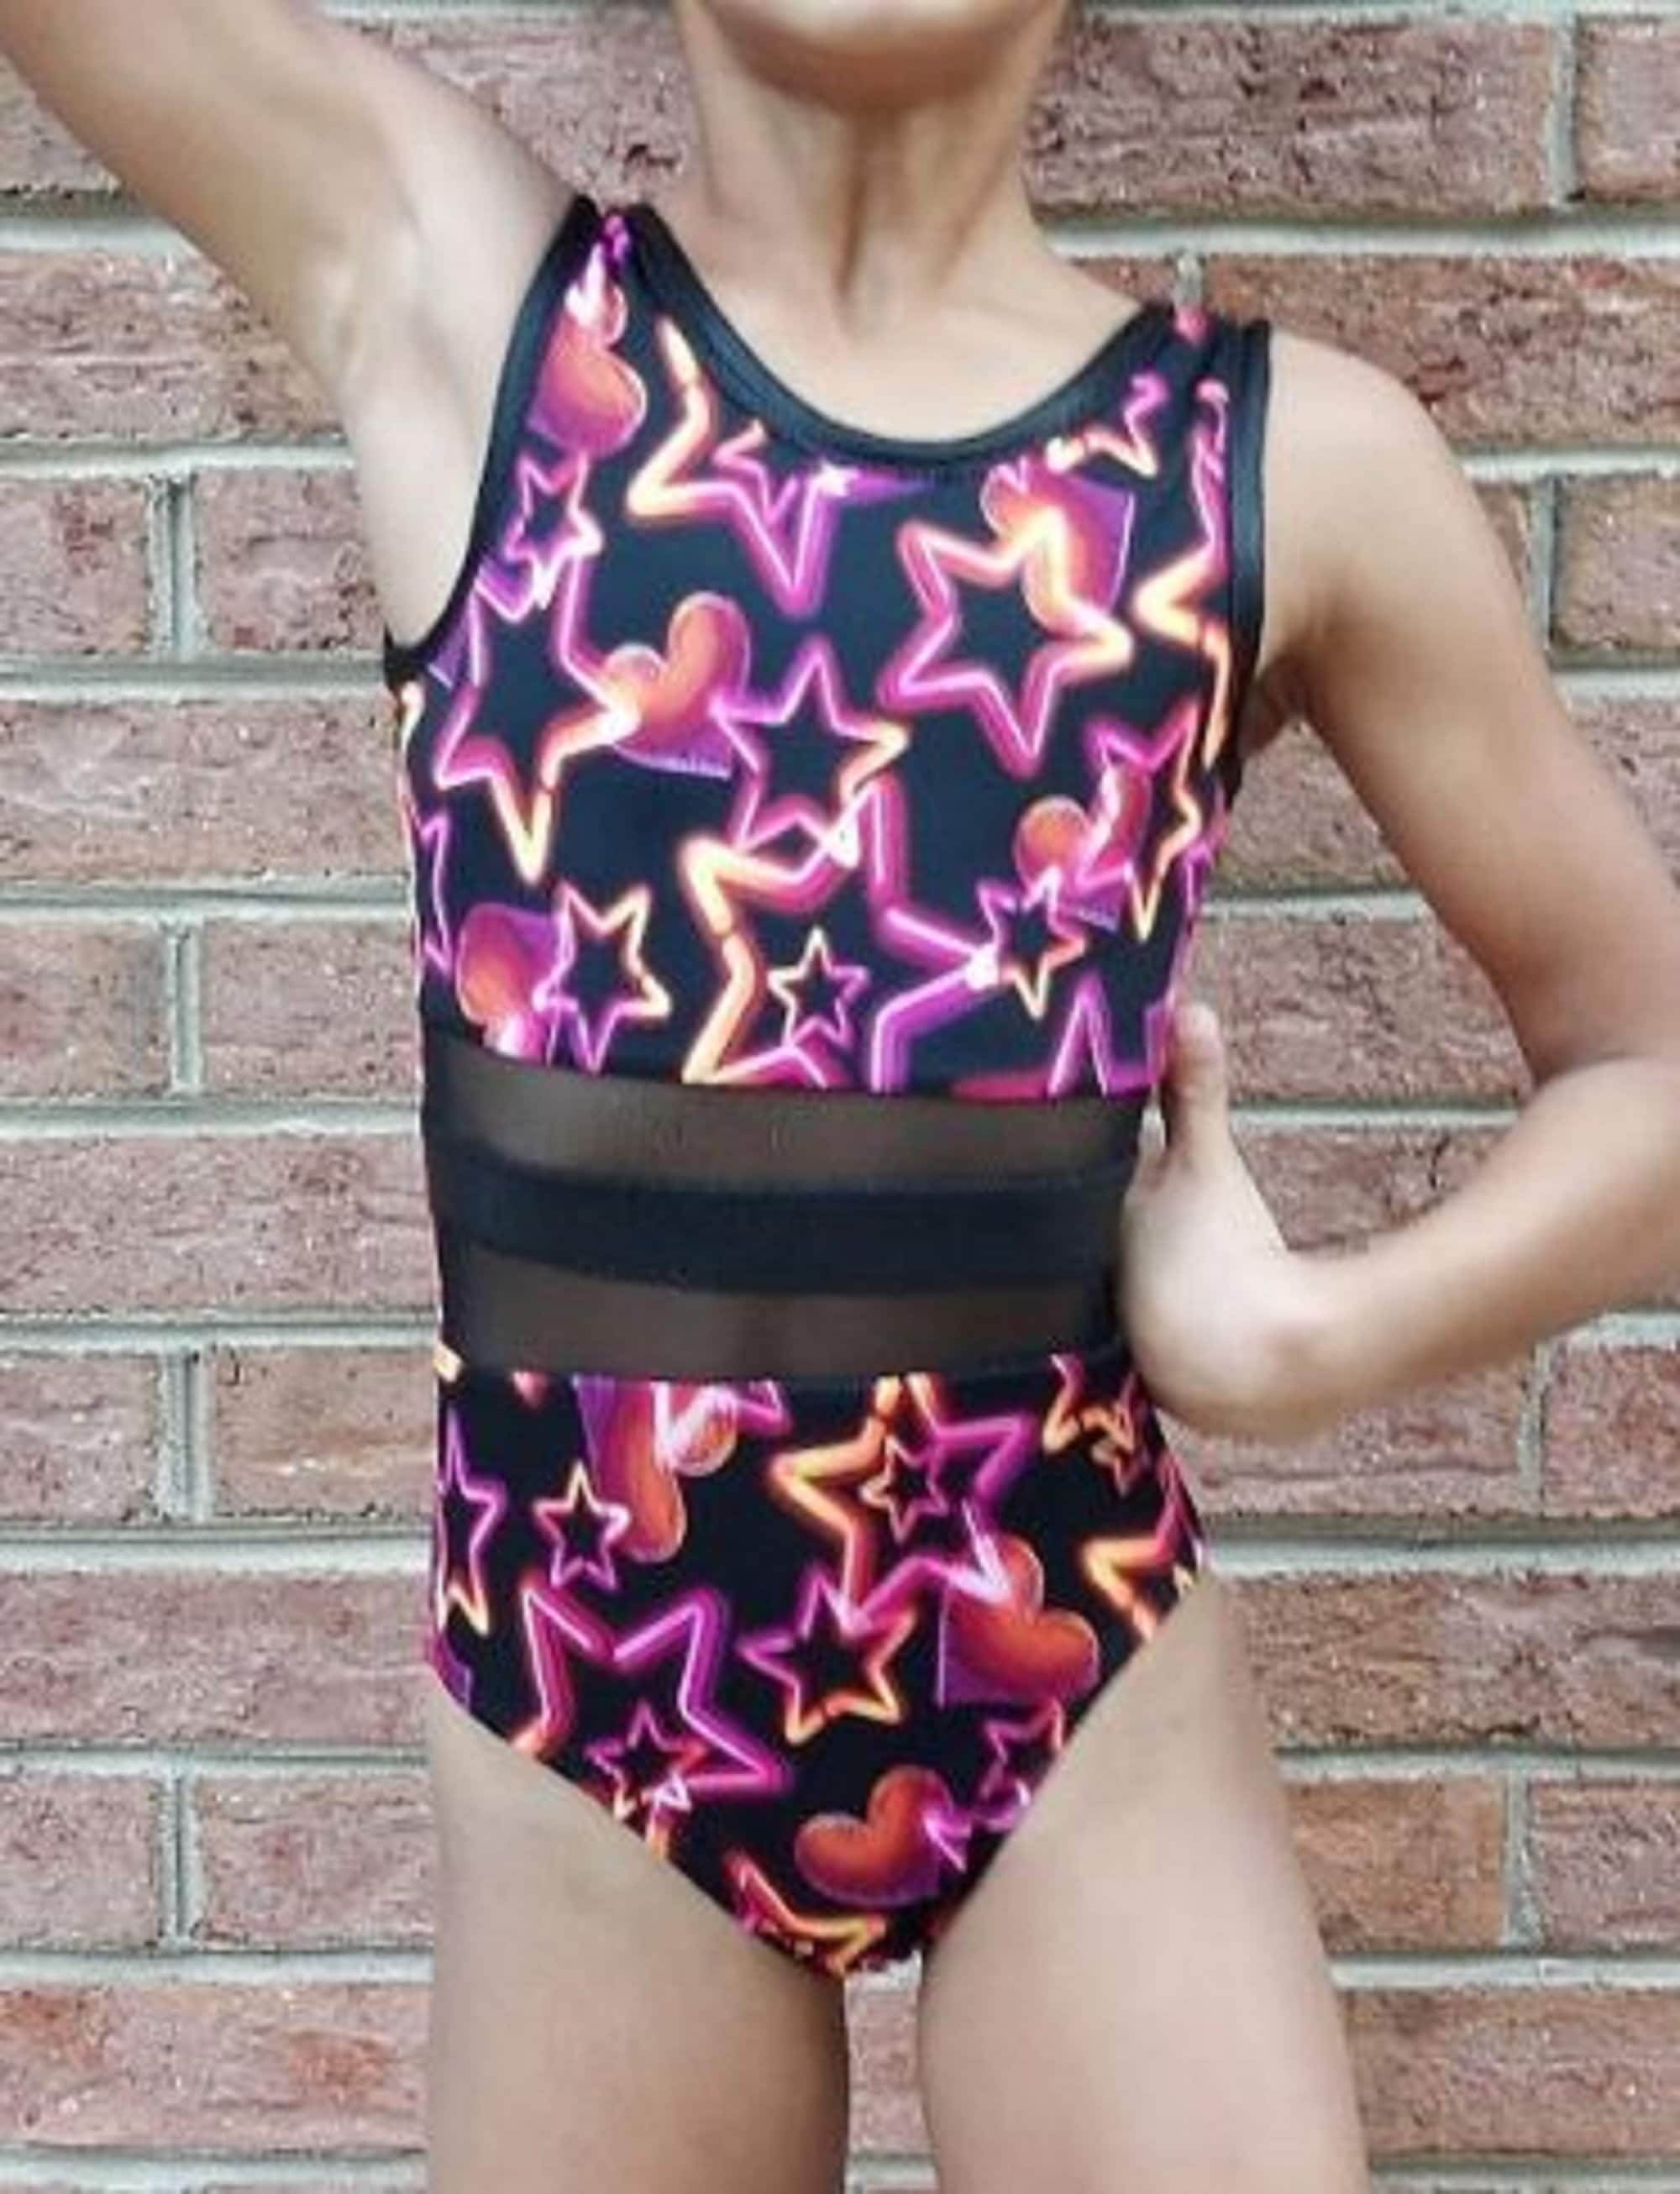 GK Stars Gymnastics & Dance Leotard for Girls and Toddlers Activewear One Piece Outfit in Fun Colorful Prints 